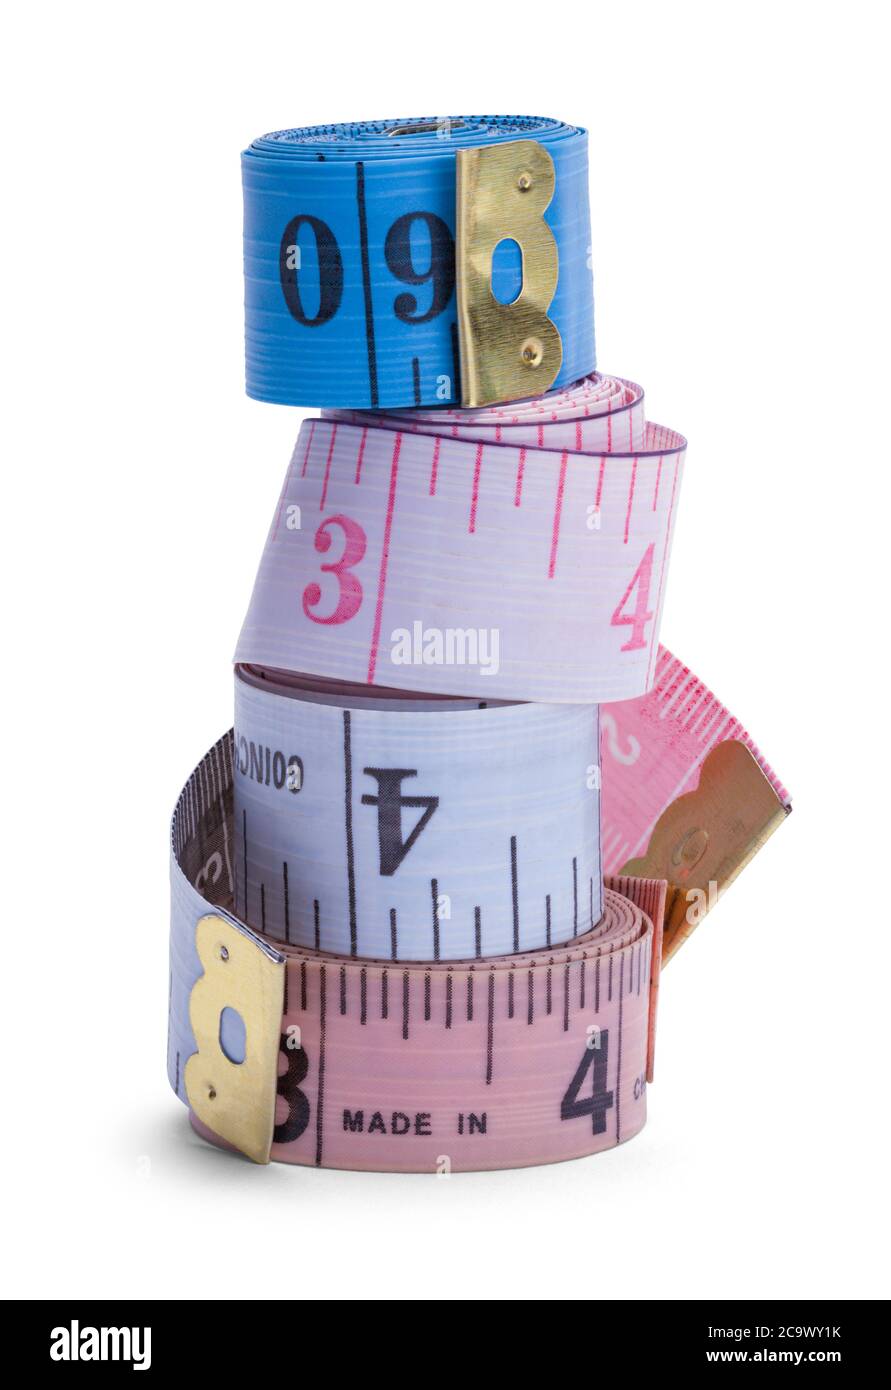 https://c8.alamy.com/comp/2C9WY1K/sewing-measuring-tapes-stacked-up-isolated-on-white-2C9WY1K.jpg